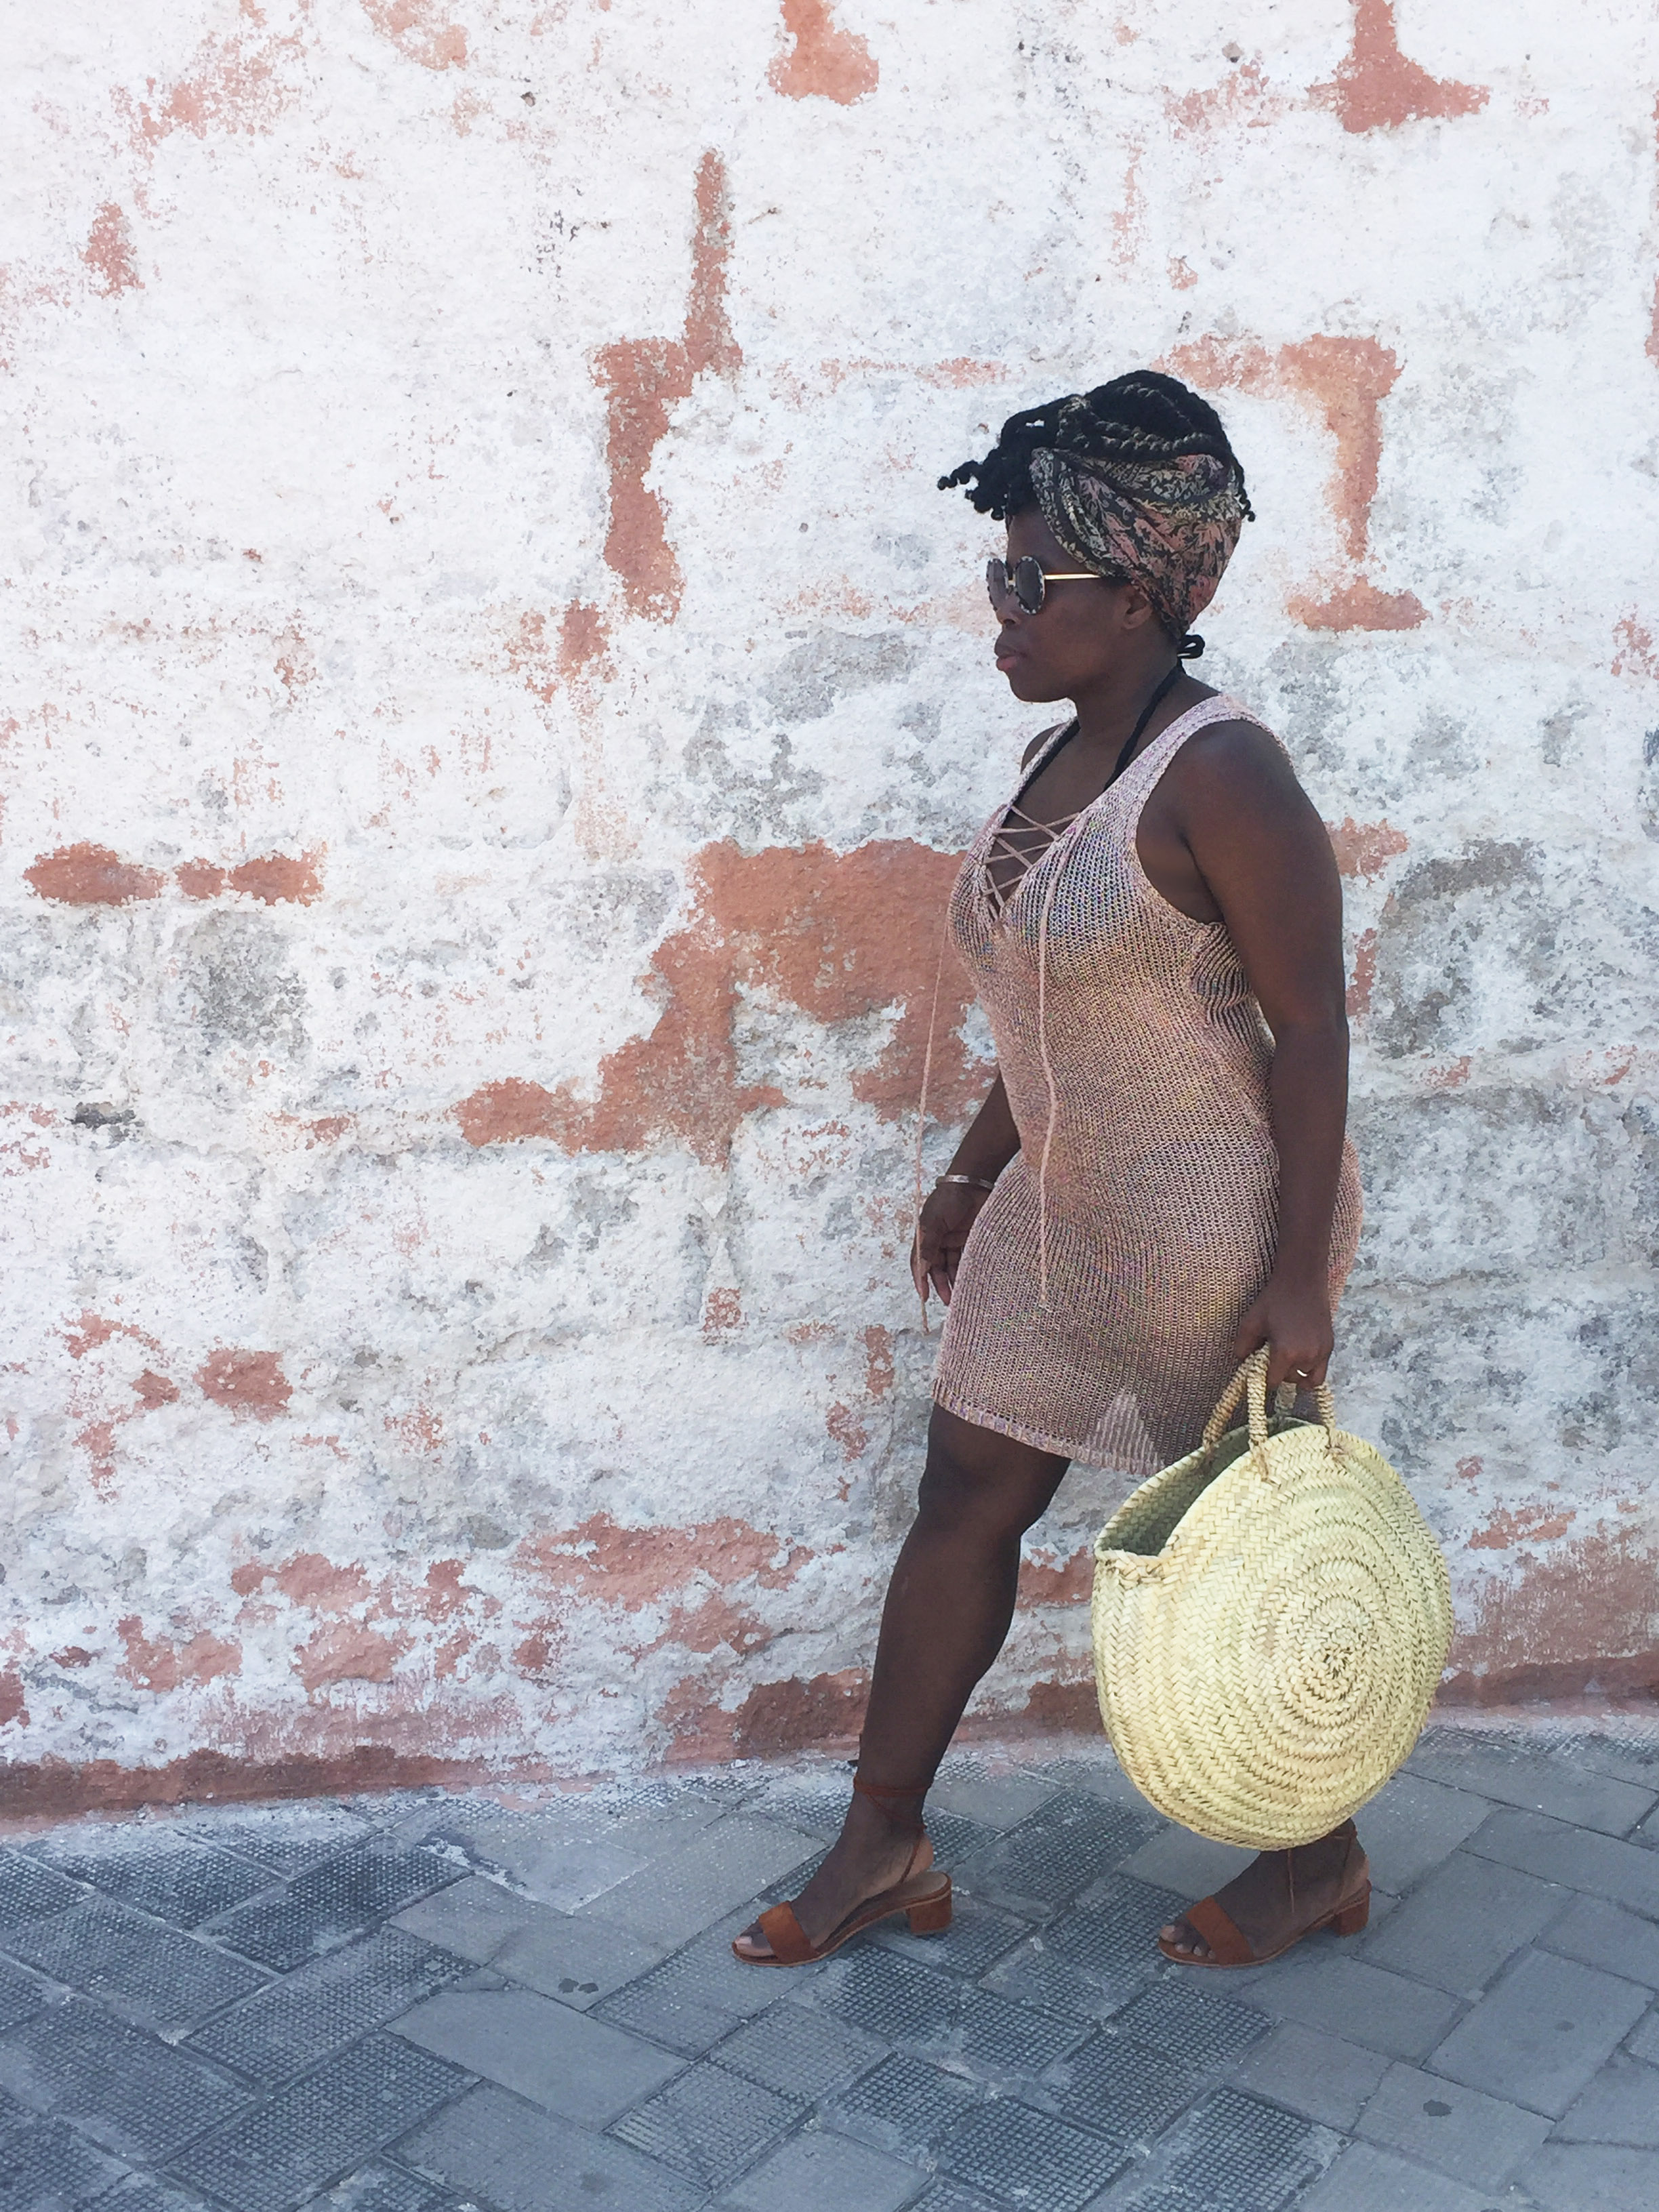 katherine in polignano a mare styled in anaise ankle sandal